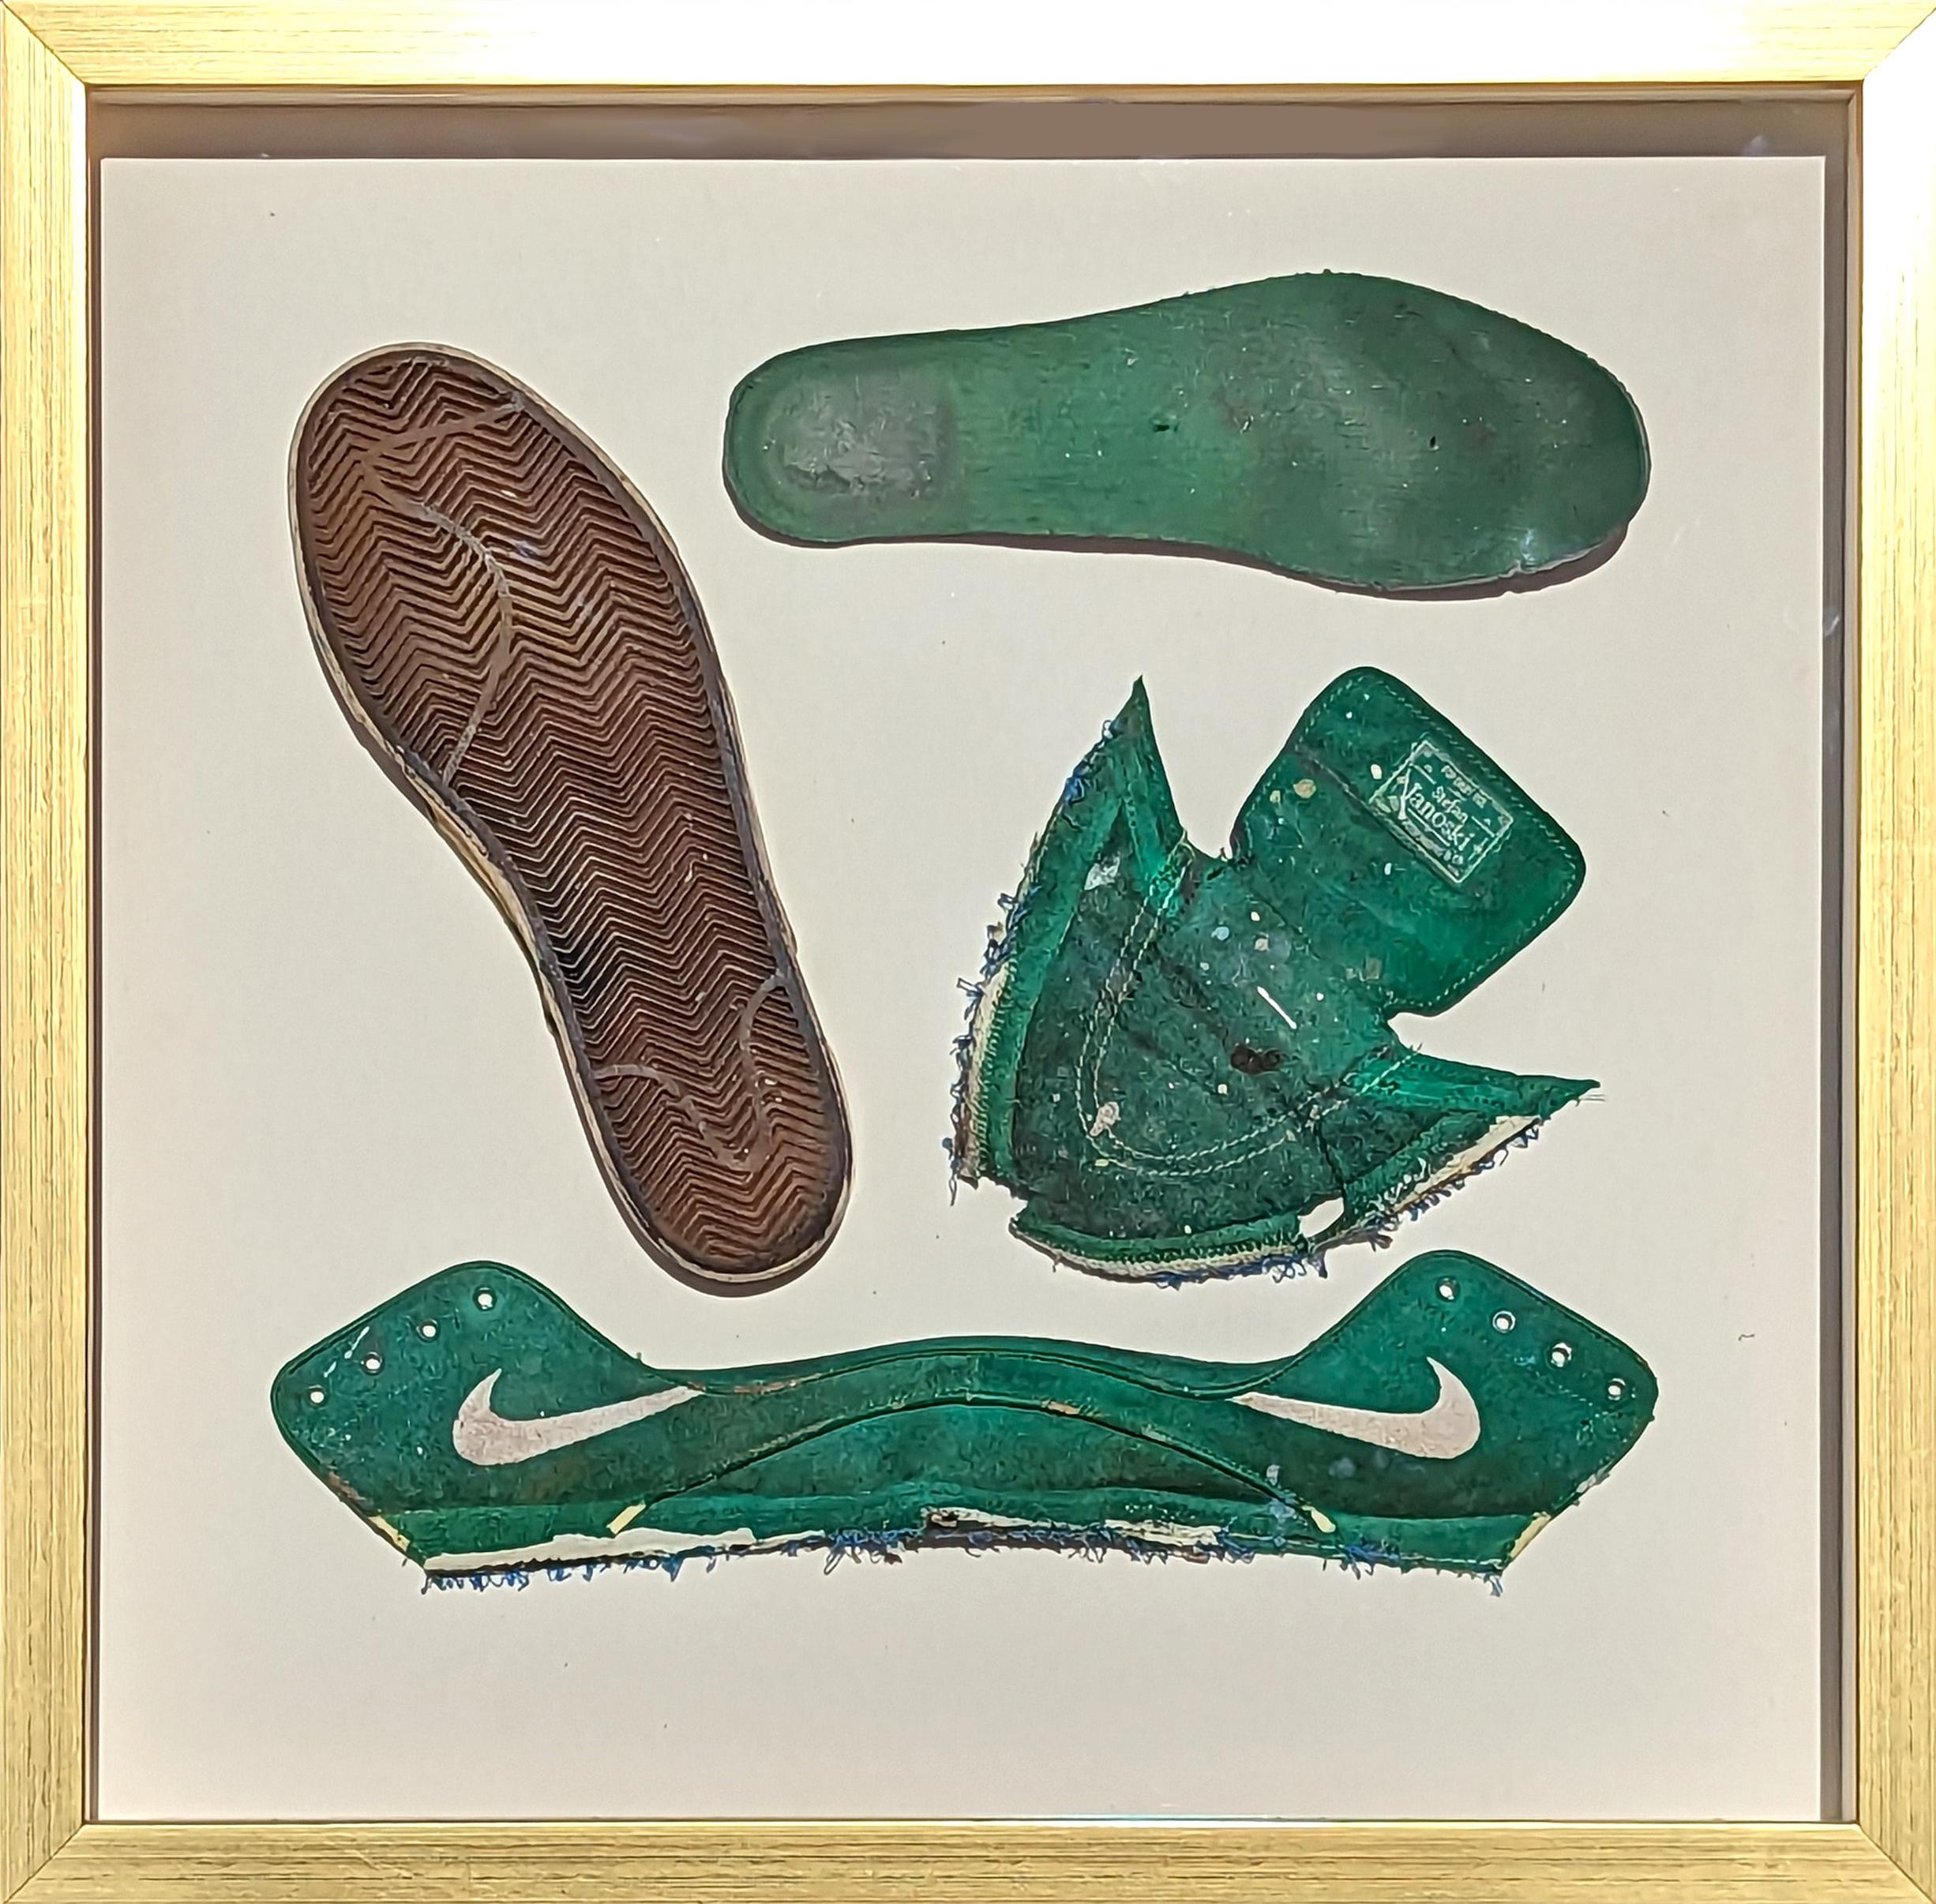 Tra' Slaughter Abstract Sculpture - Contemporary Deconstructed Mixed Media & Found Object Green Shoe Painting